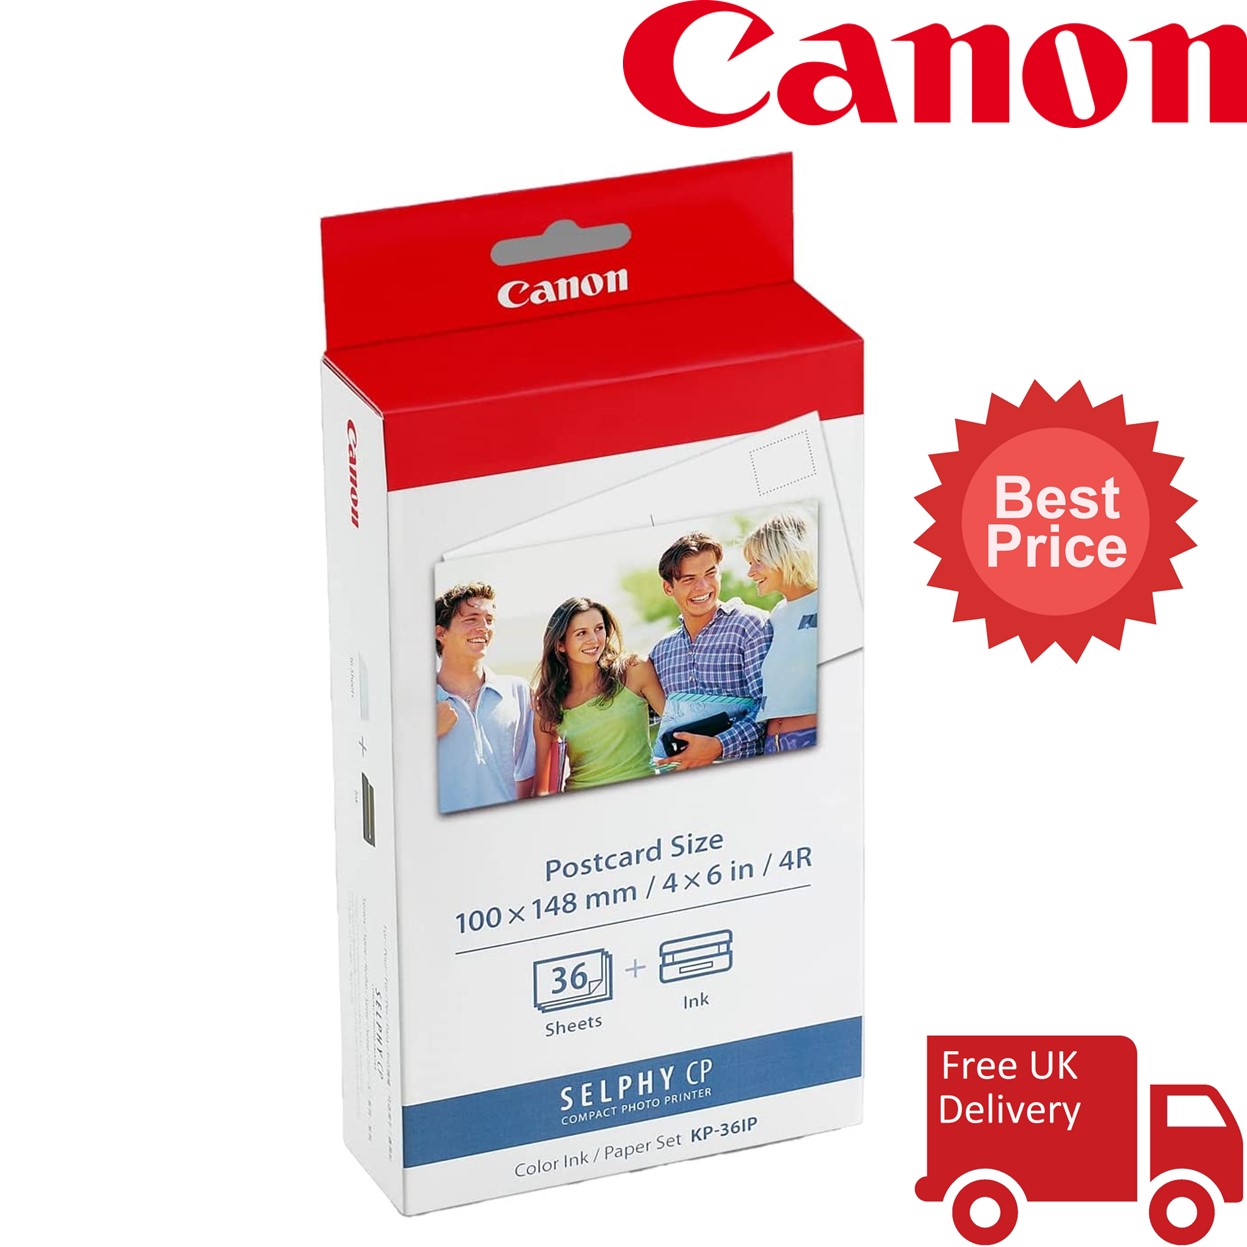 Canon KP-36IP Ink/Paper for Selphy CP Printers (36x 4x6